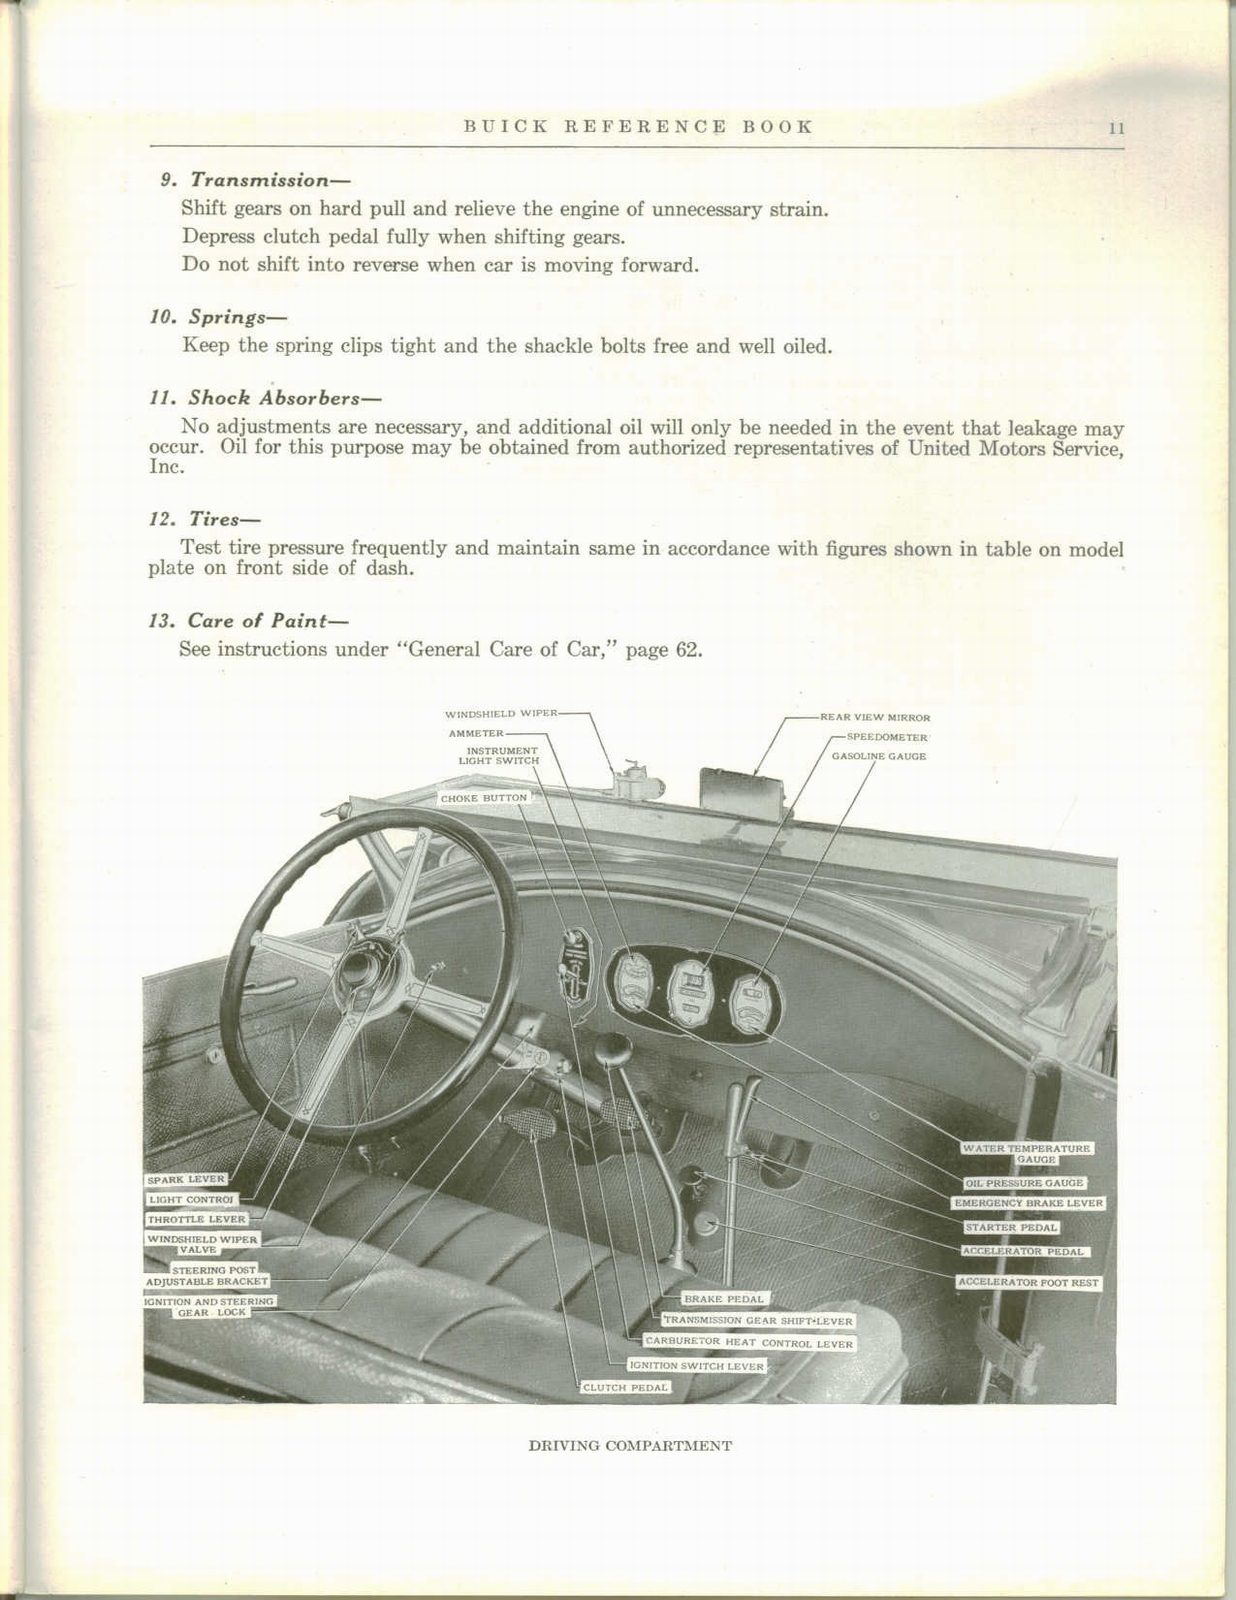 n_1928 Buick Reference Book-11.jpg